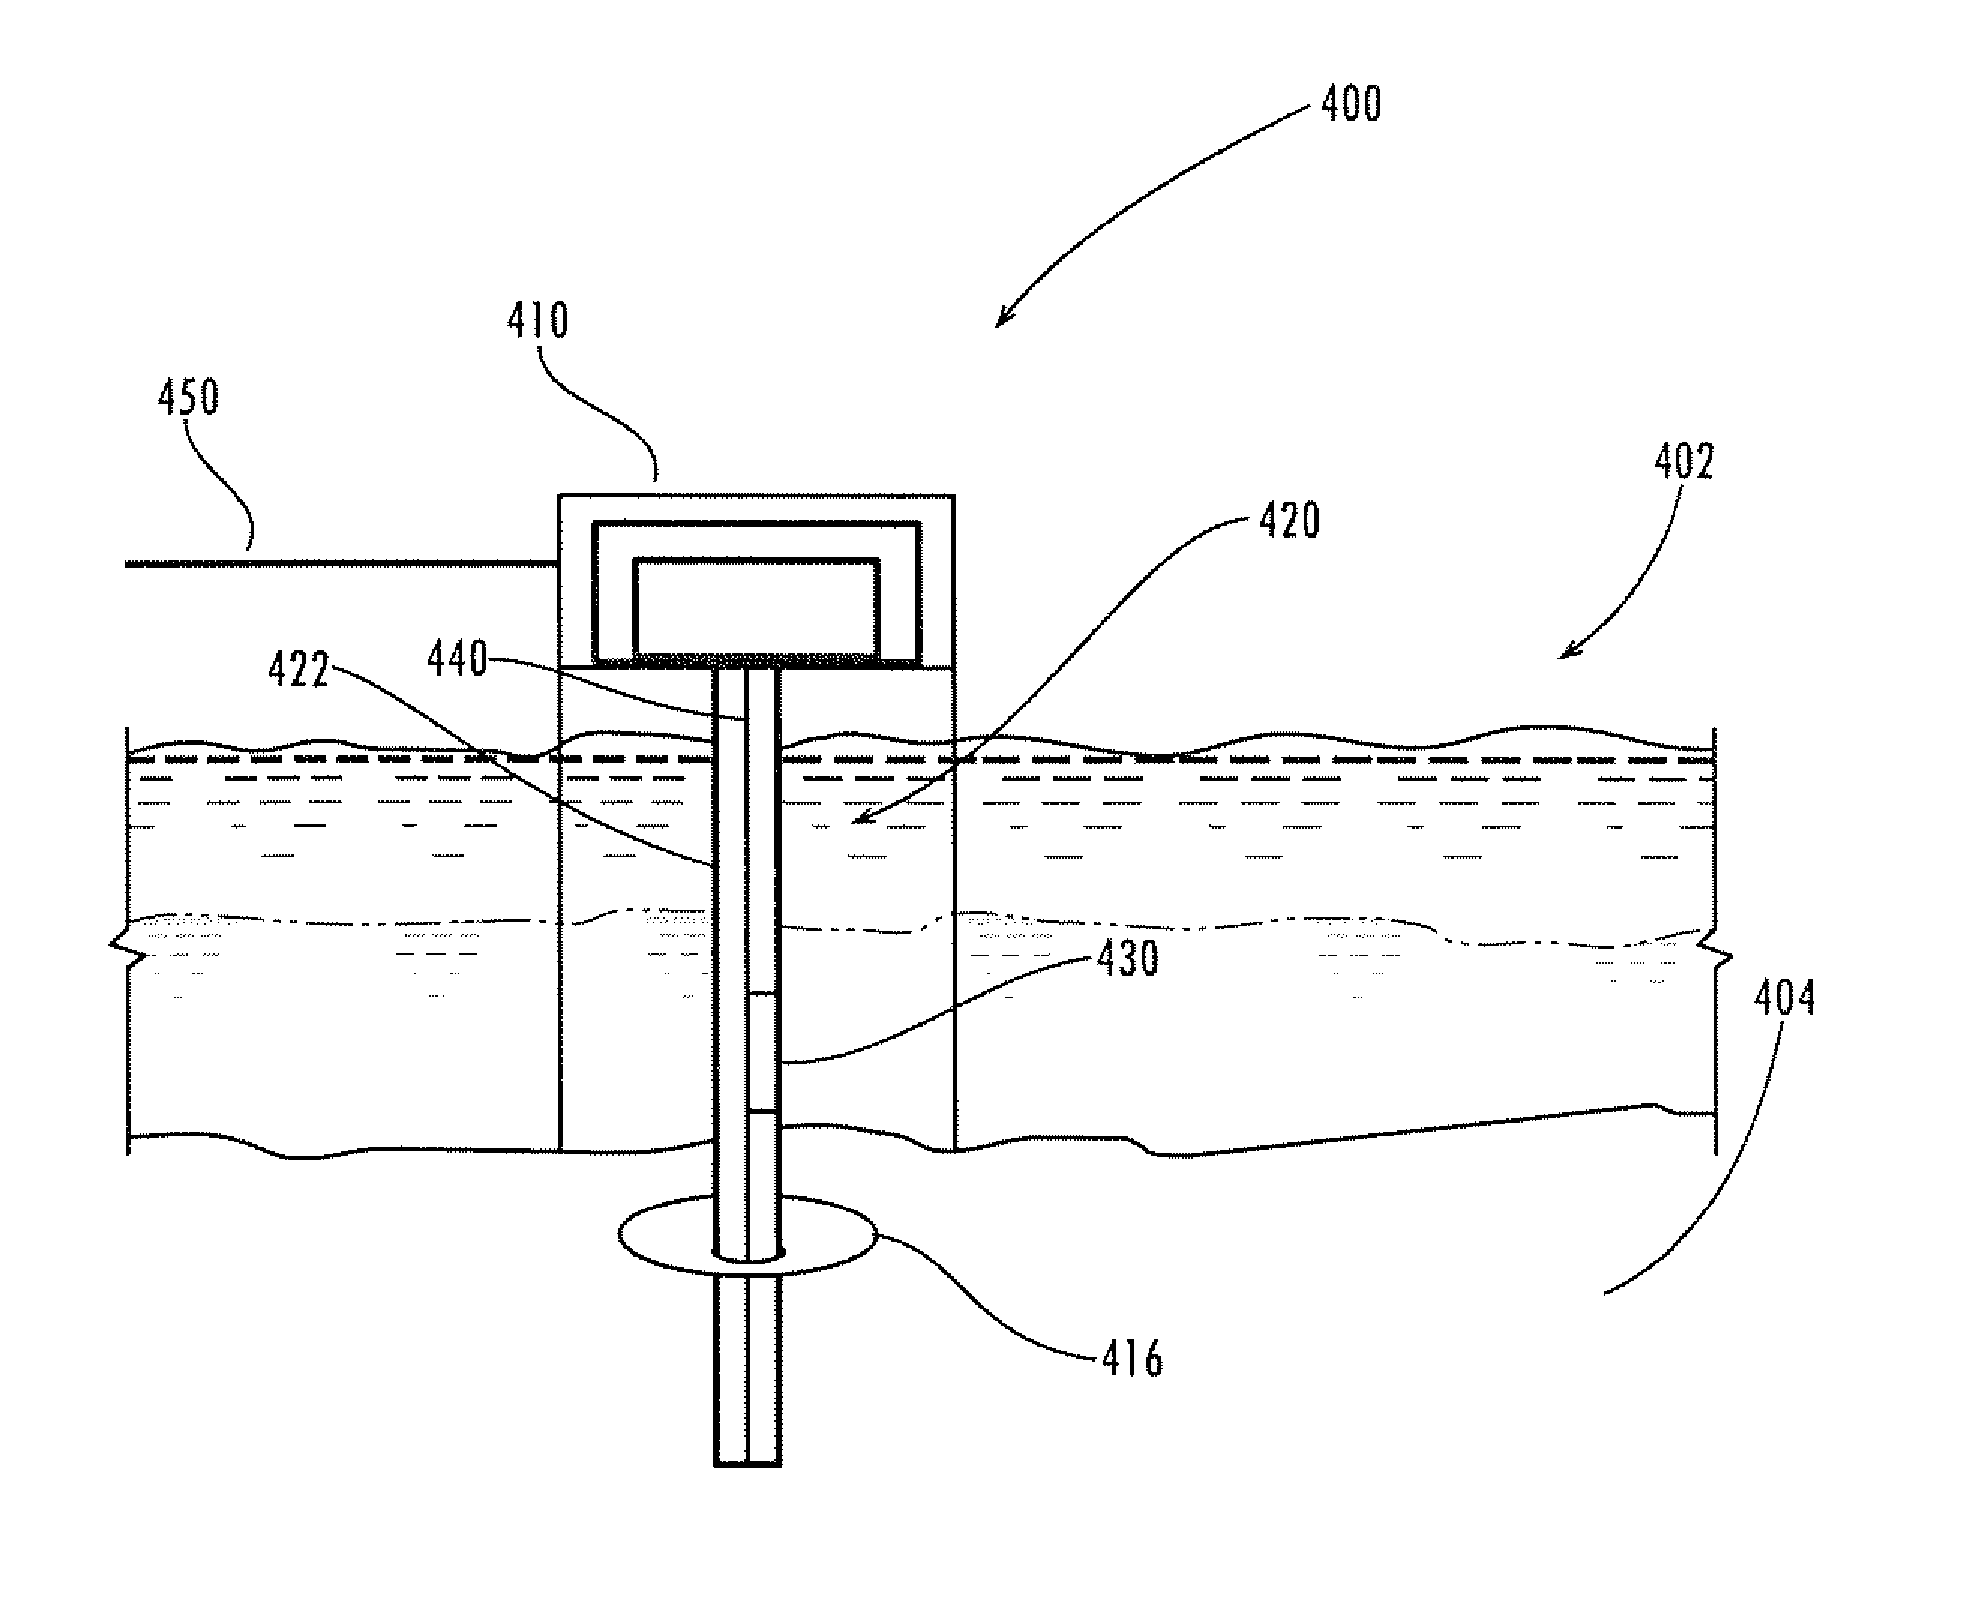 Systems and Methods for Generating Electricity Using a Thermoelectric Generator and Body of Water